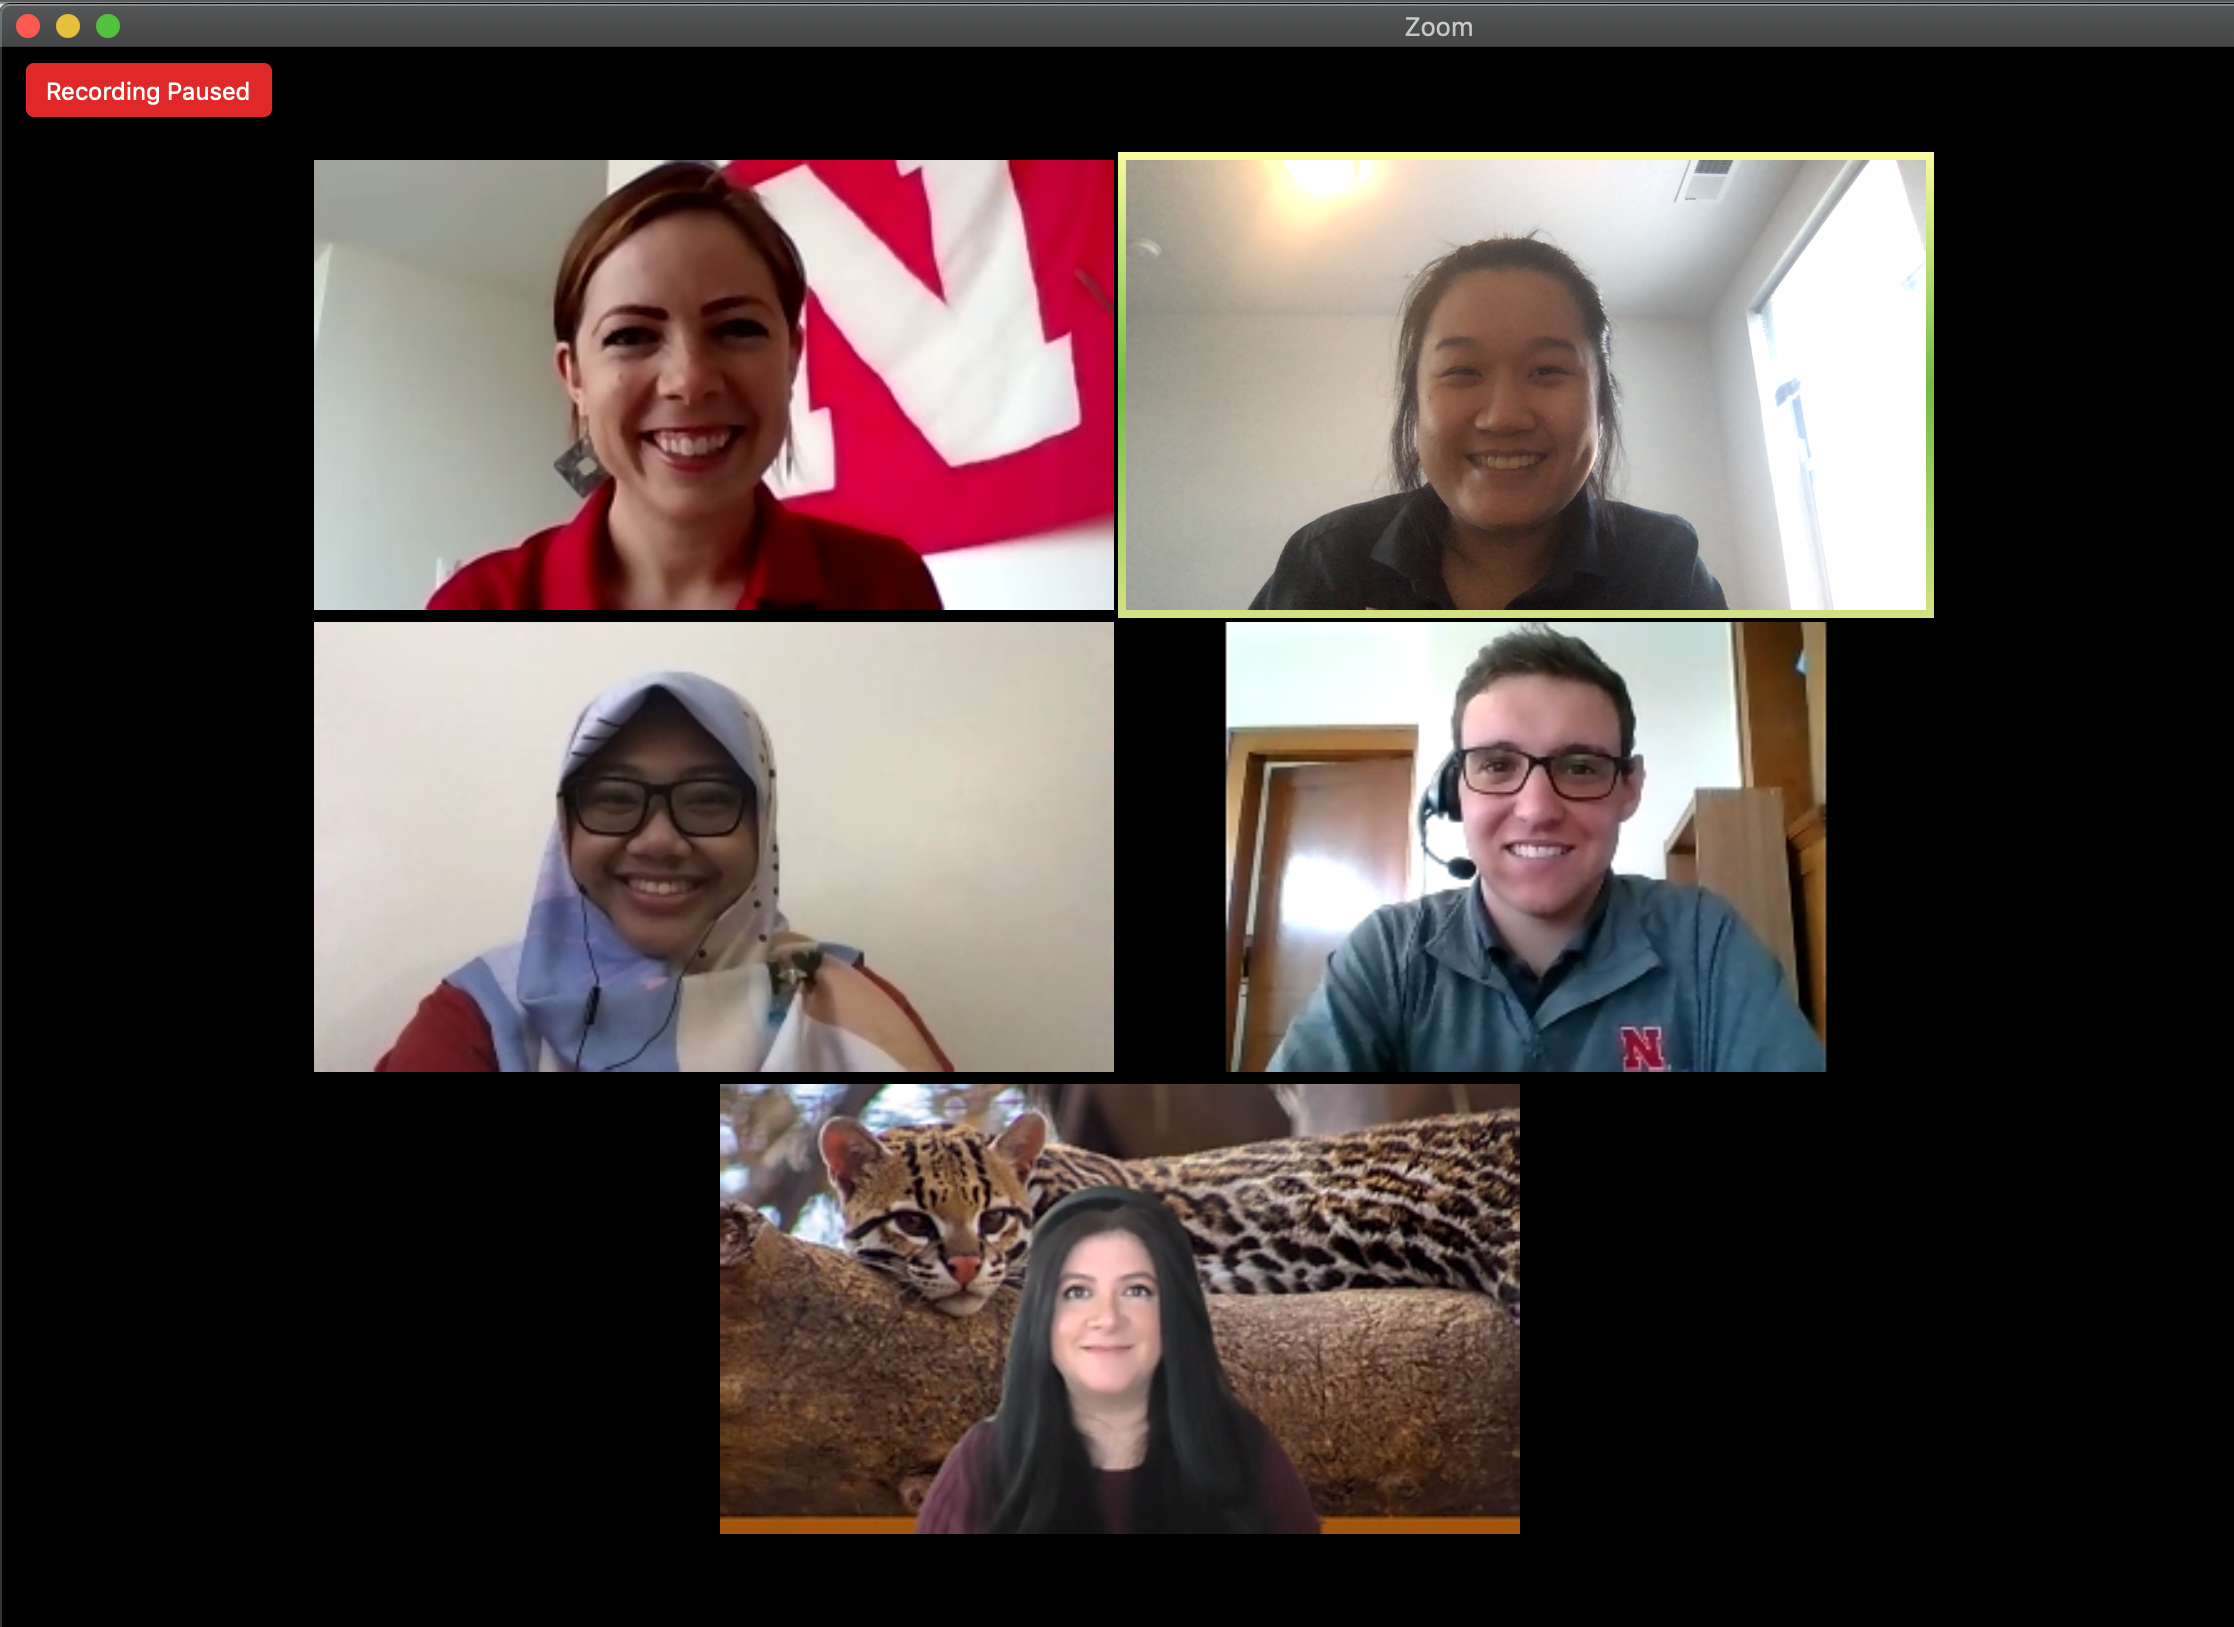 International graduate students (second row L to R: Kiki Rizki Amalia and Agustín Olivo, third row: Gabriela Palomo-Munoz) participate in an online panel discussion, moderated by IANR Global Staff Brianne Wolf and Yi Xuen Tay (first row, L to R).